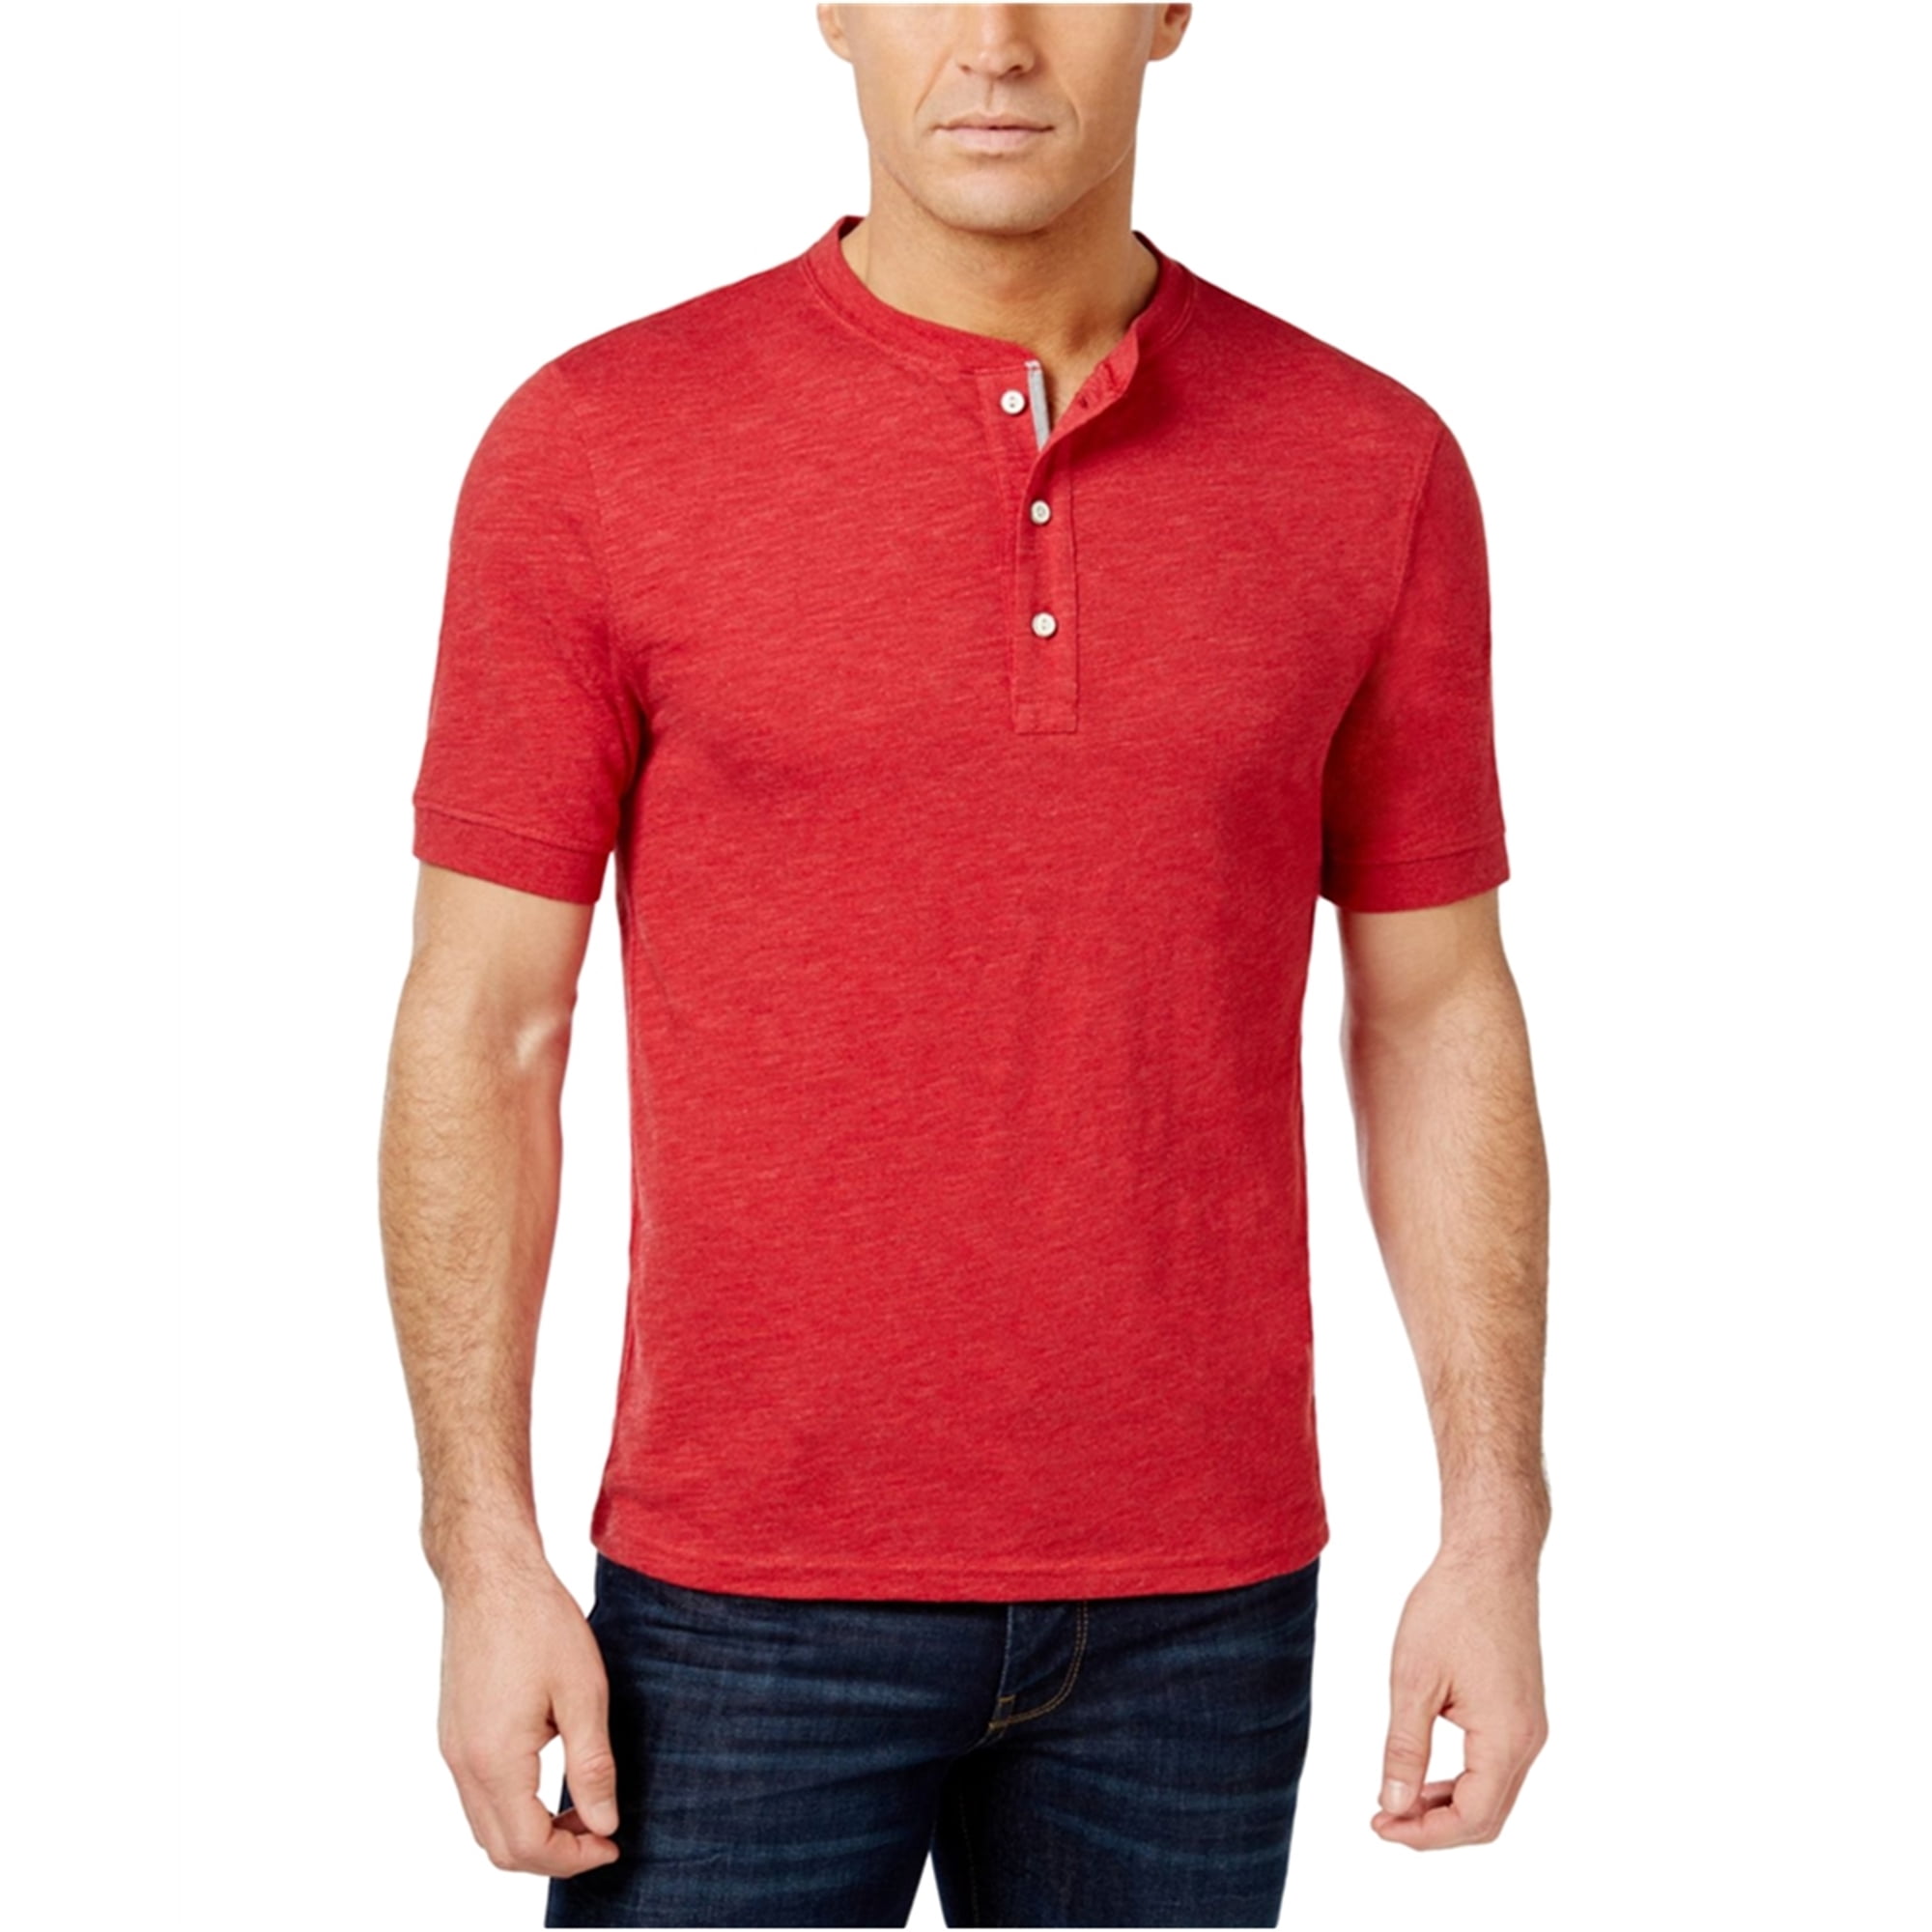 Club Room Mens Solid SS Henley Shirt, Red, Small